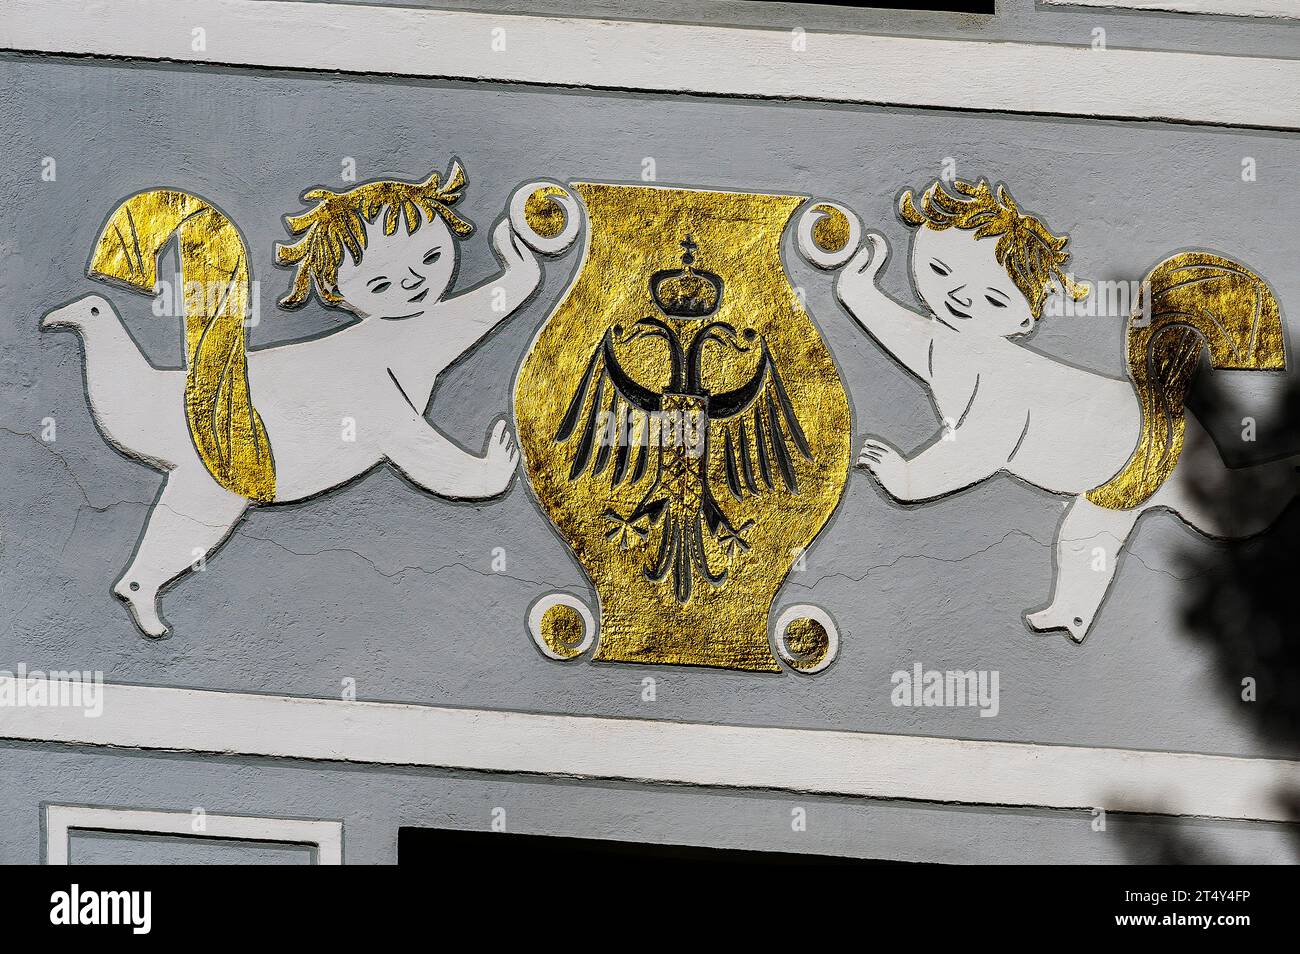 Fresco with golden coat of arms and double-headed eagle with crown on grey facade, Kempten, Allgaeu, Bavaria, Germany Stock Photo